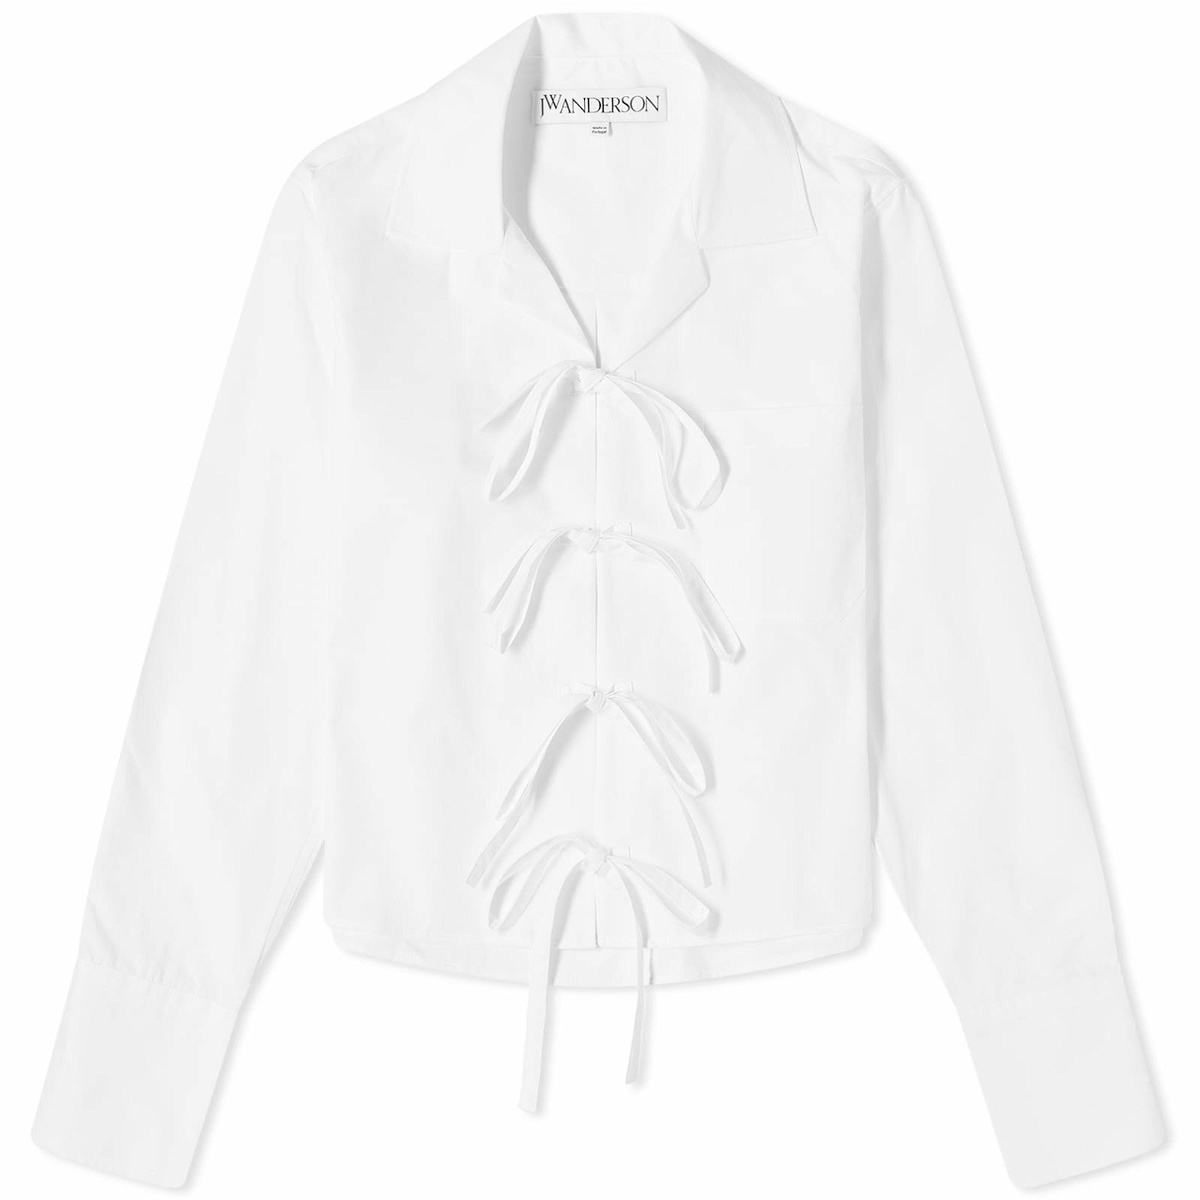 Photo: JW Anderson Women's Bow Tie Cropped Shirt in White